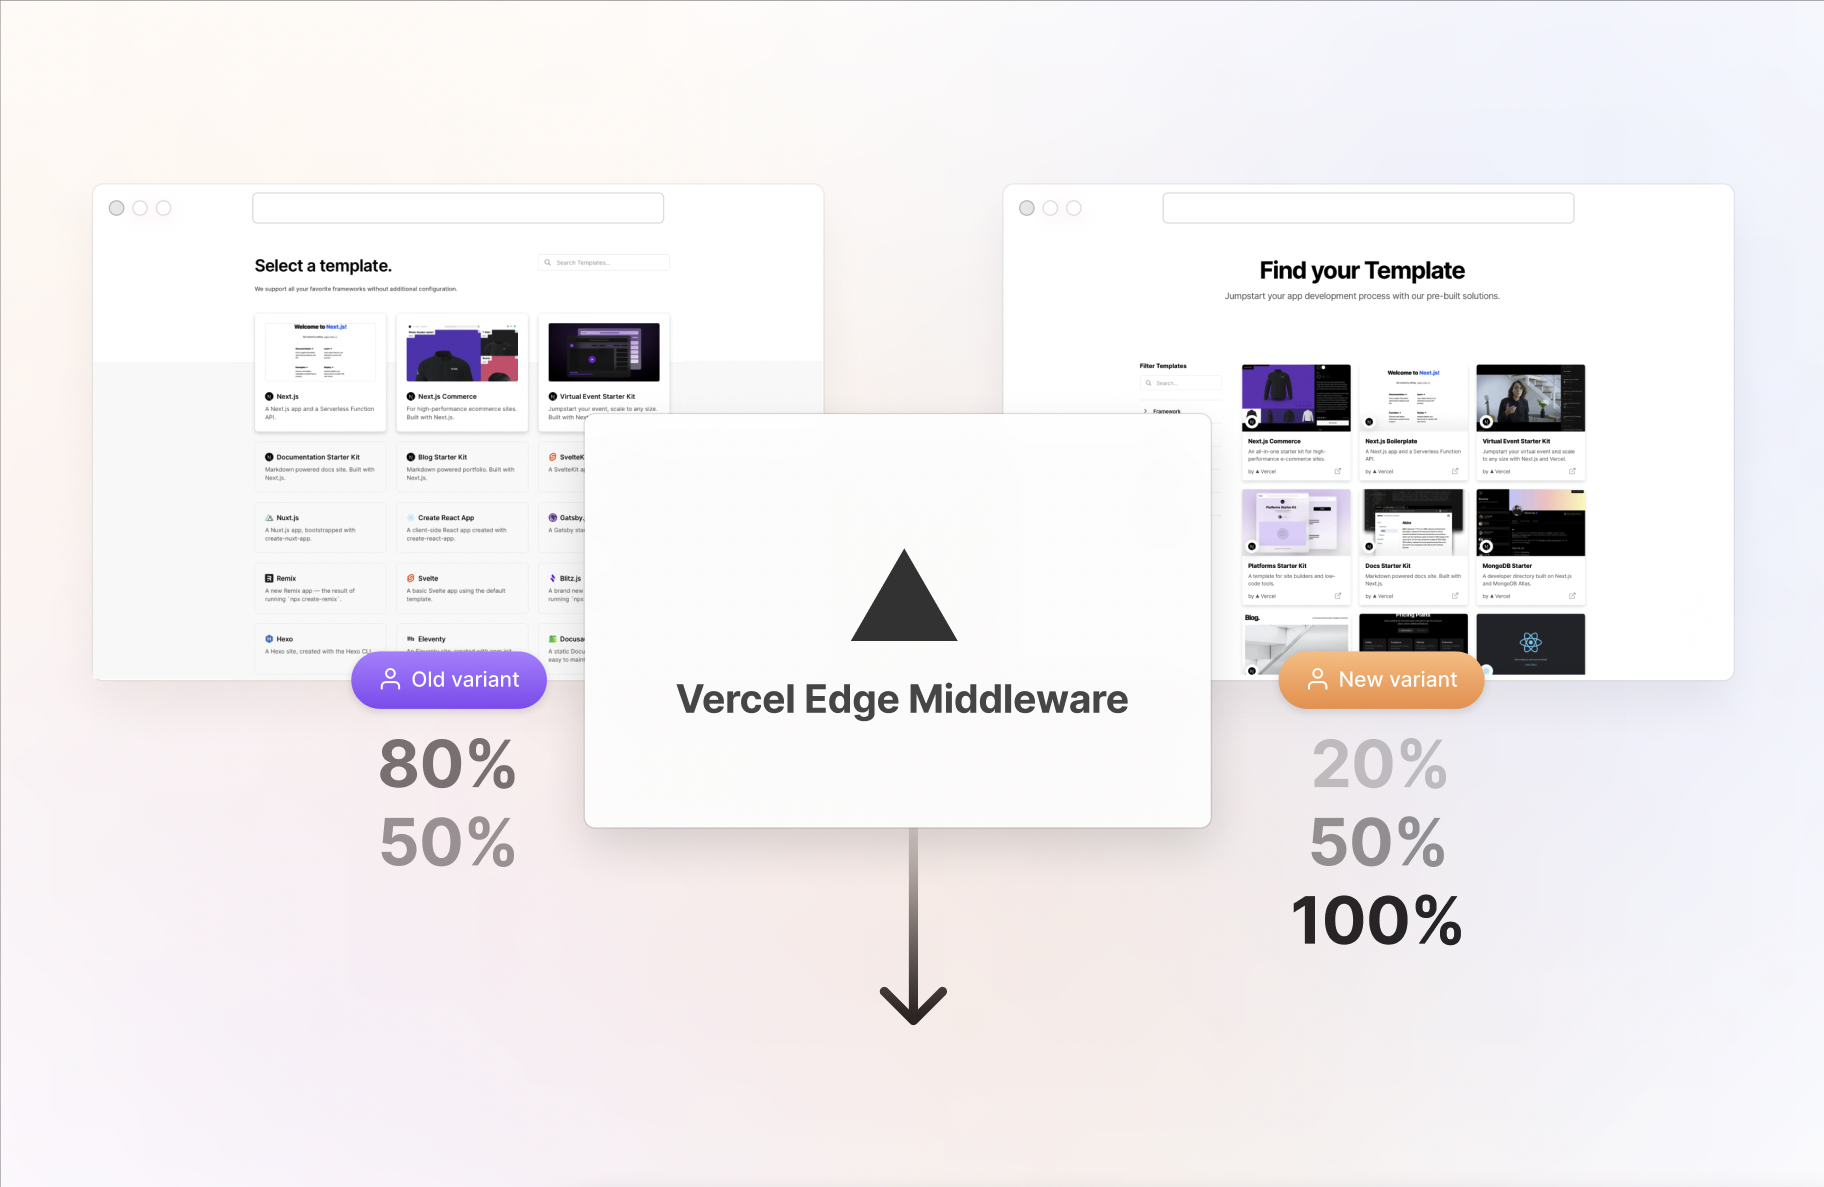 We used Vercel's Edge Middleware to stagger our launch into 3 phases.